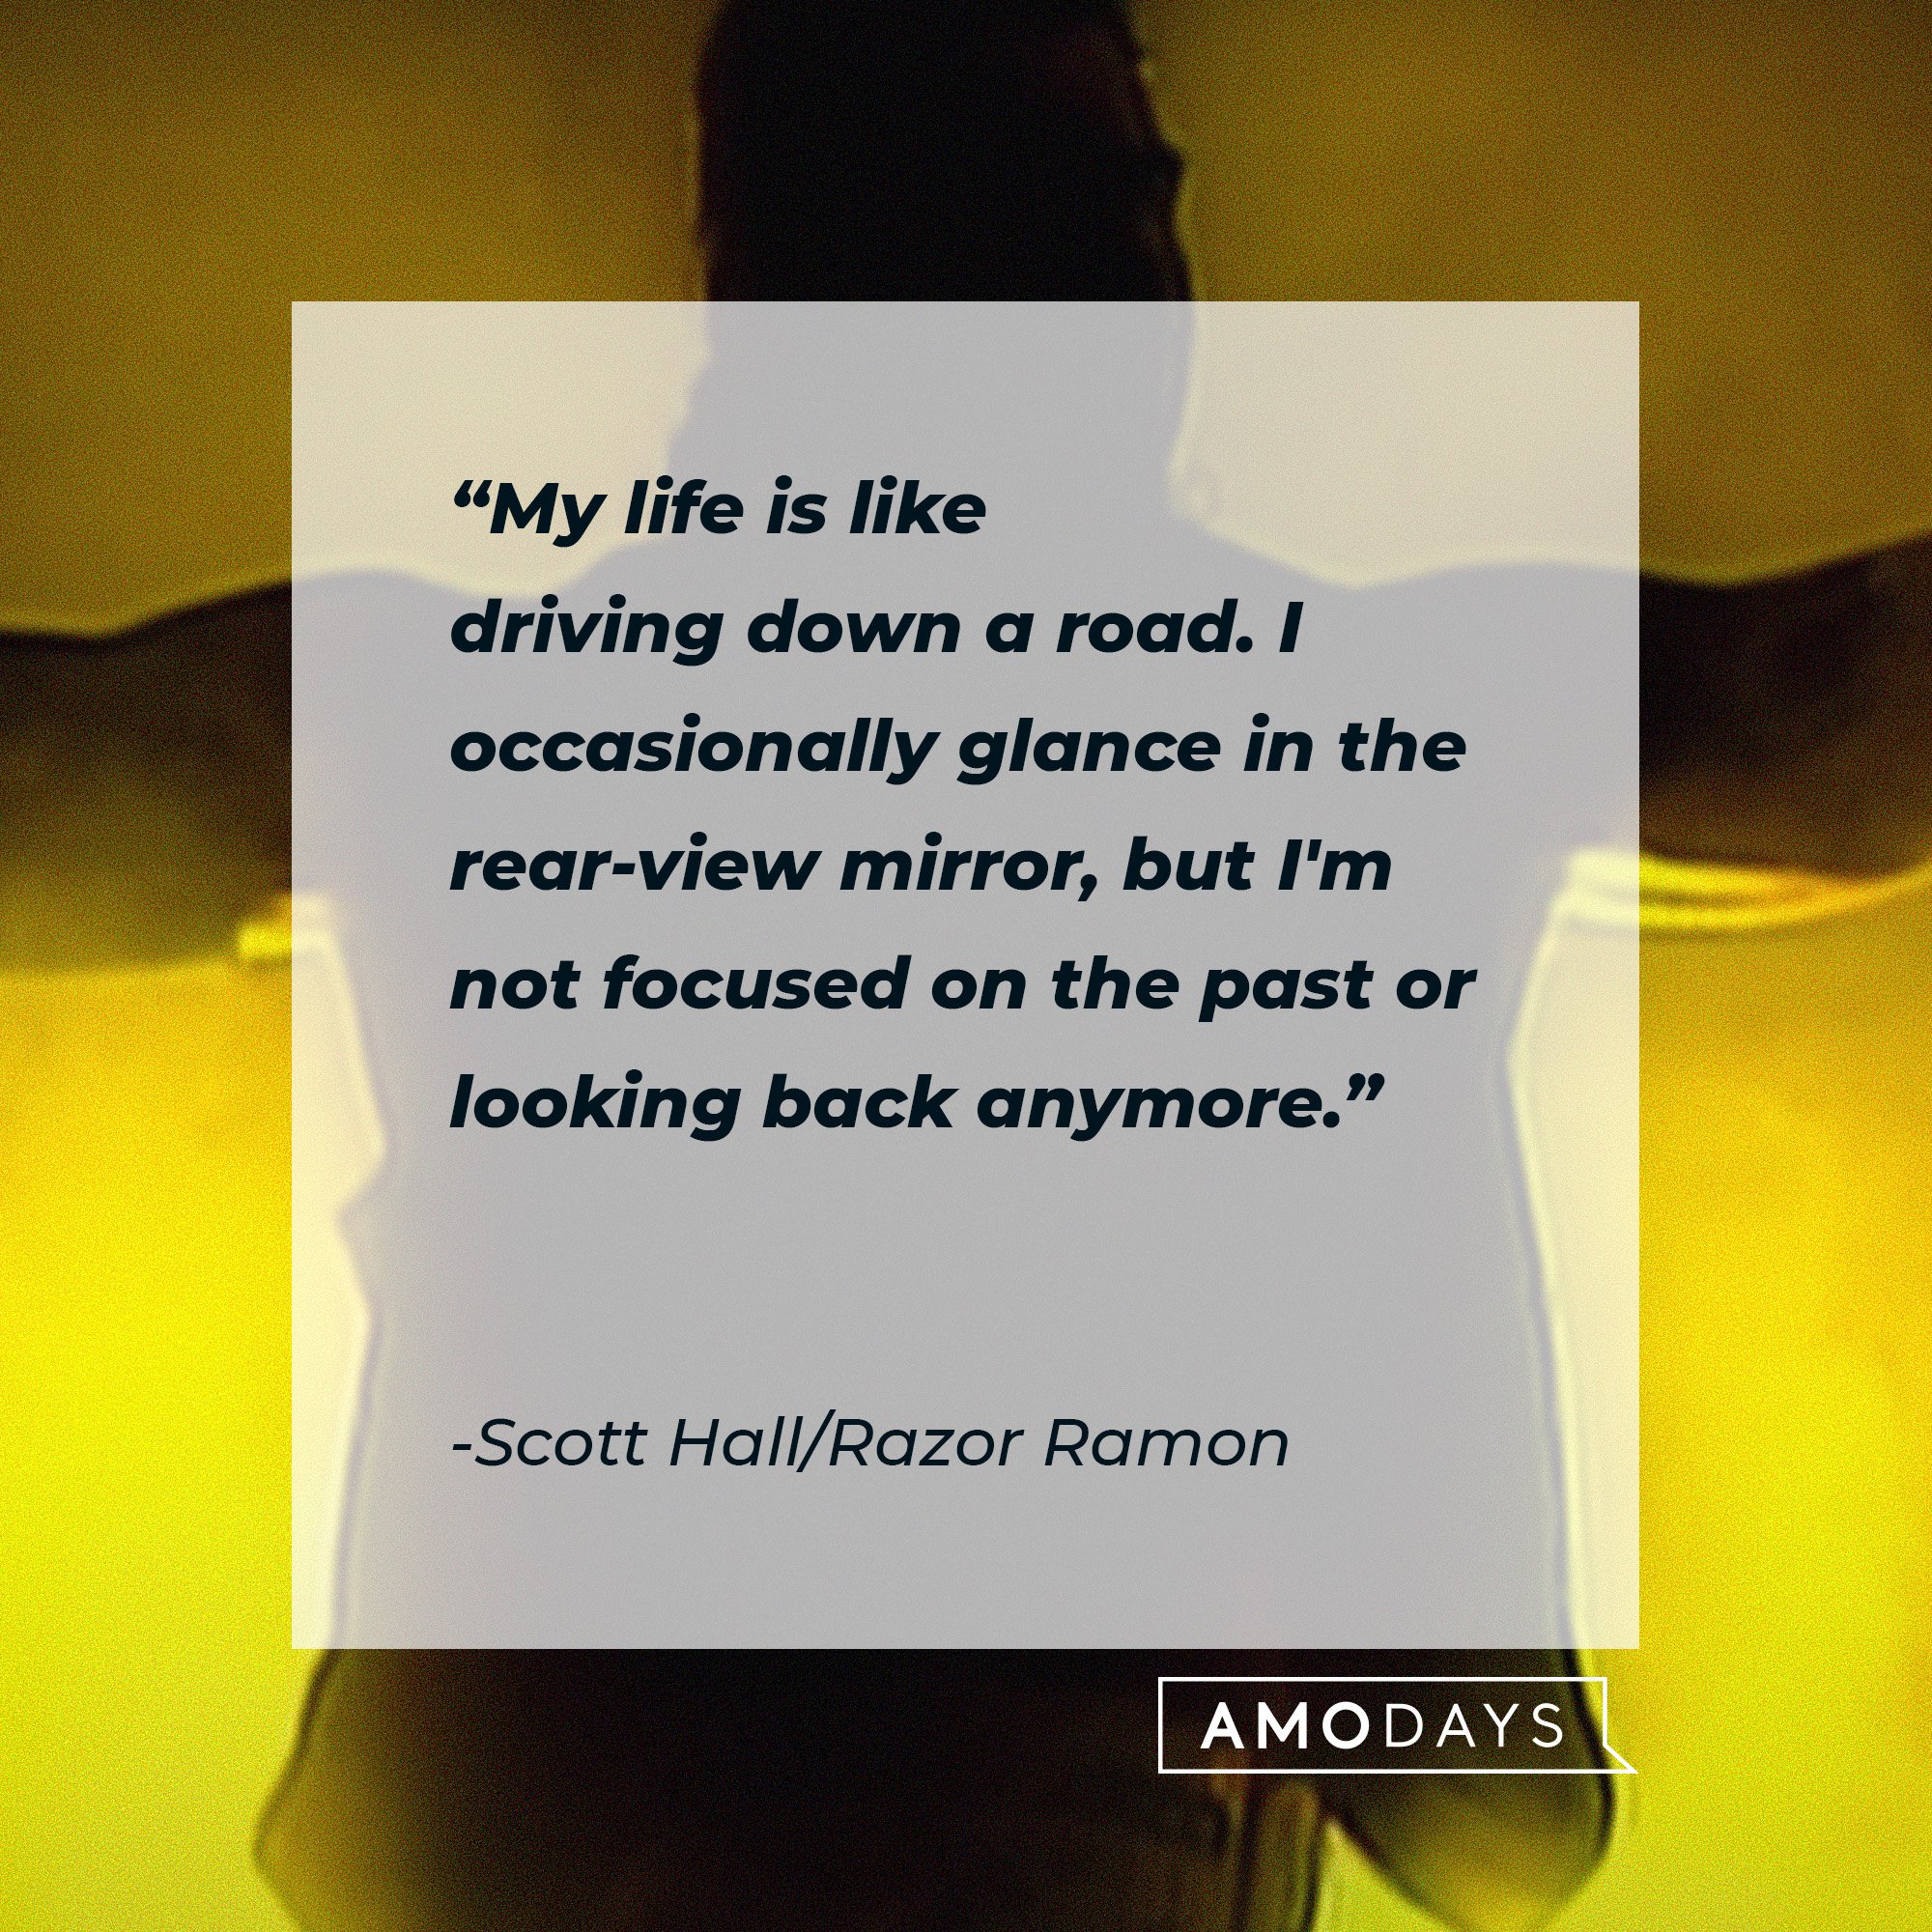 Scott Hall/Razor Ramon’s quote: "My life is like driving down a road. I occasionally glance in the rear-view mirror, but I'm not focused on the past or looking back anymore." | Image: AmoDays